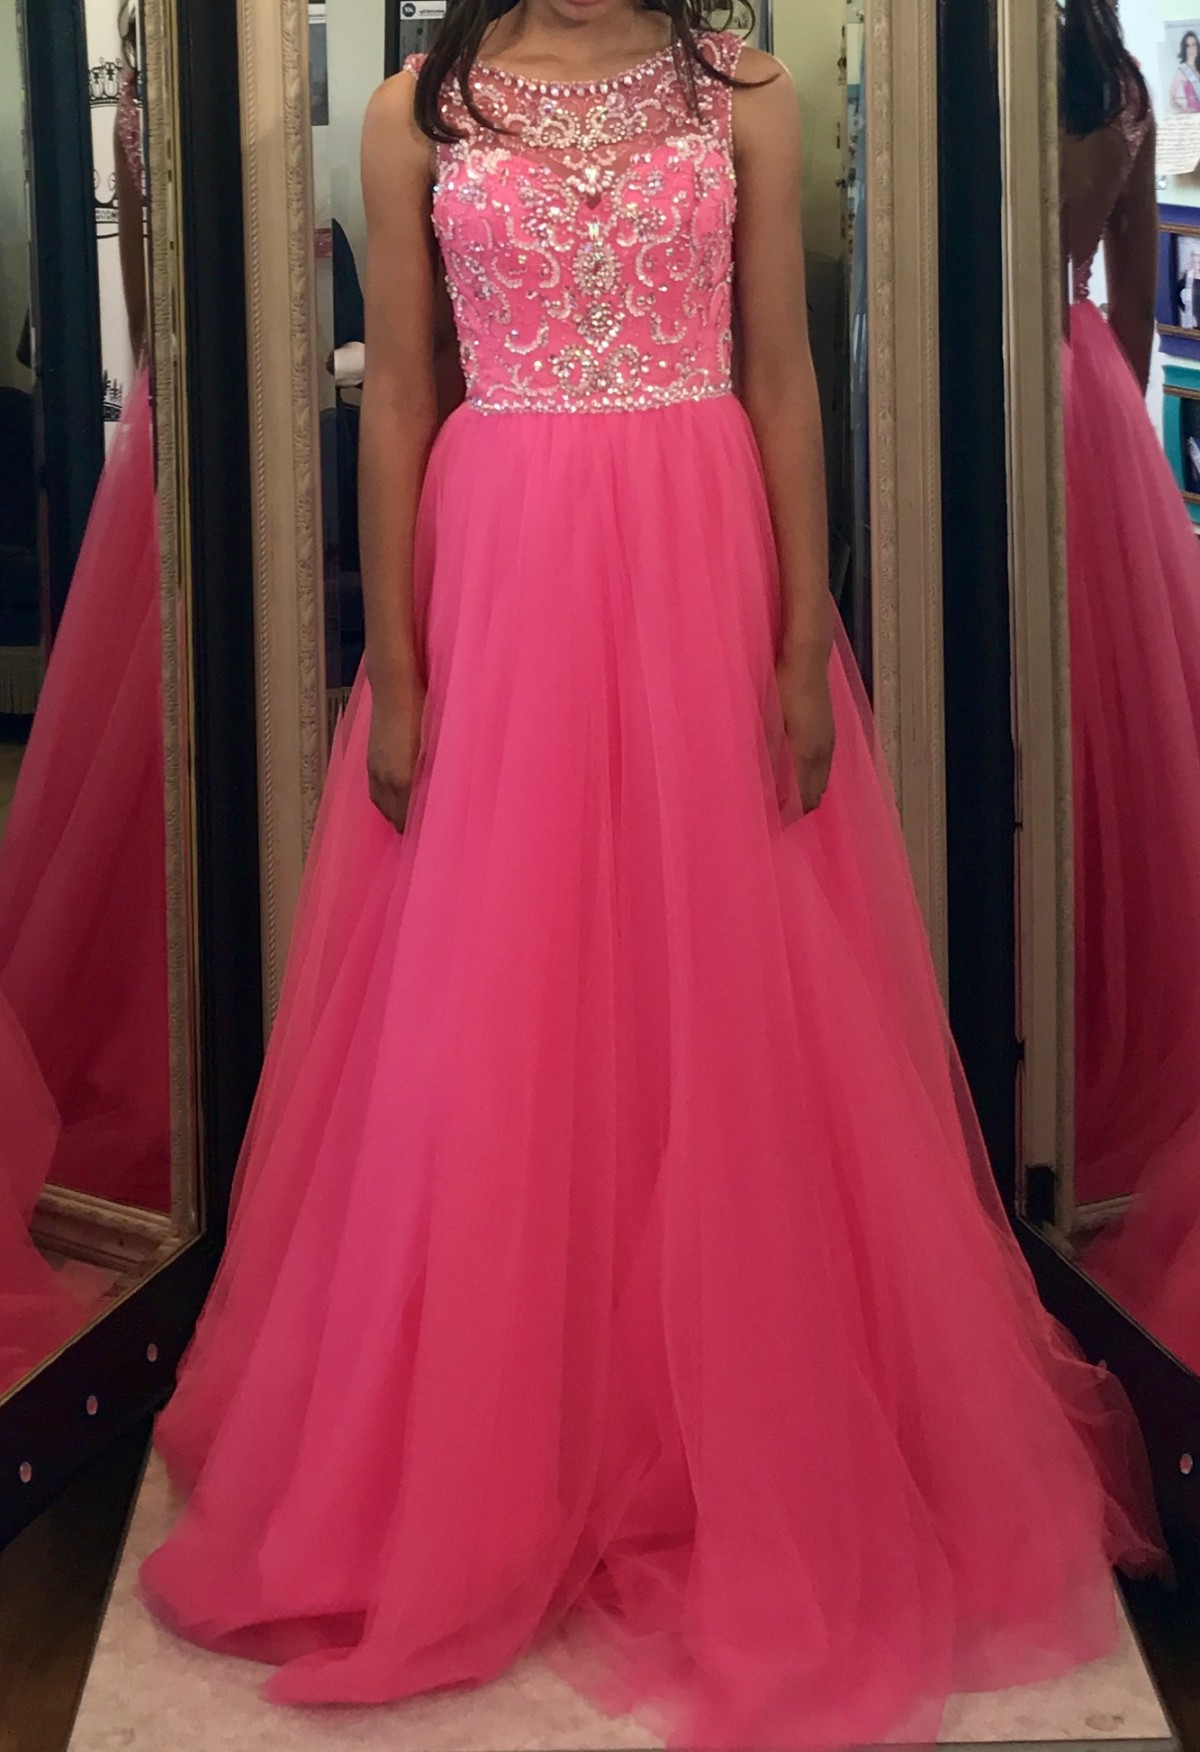 Teen Pageant Dresses Miss Priss Prom and Pageant store Lexington  Kentucky largest selection of Sherri Hill prom gowns